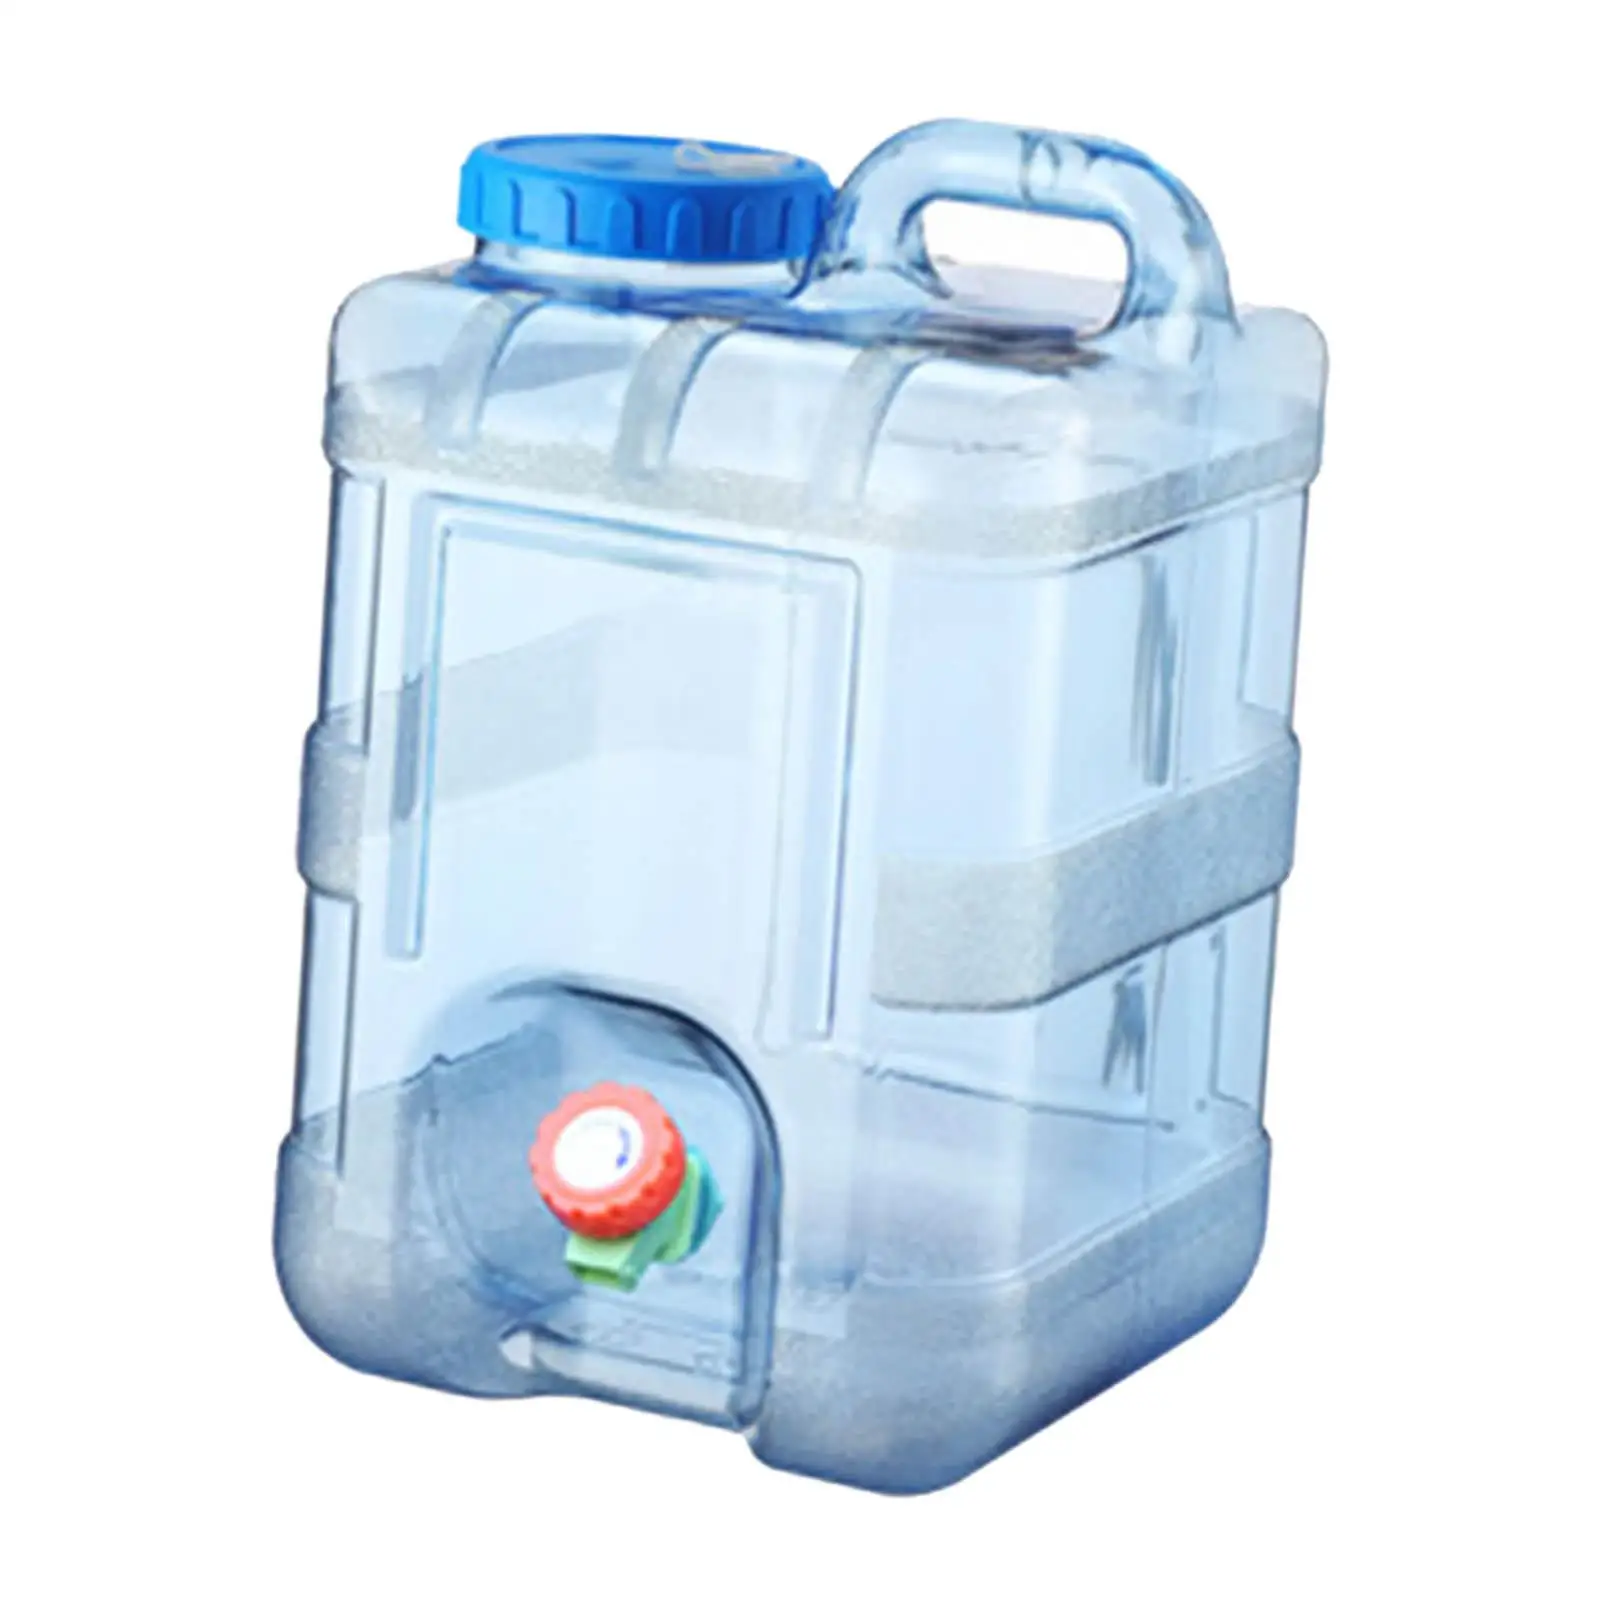 Portable Camping Water Storage Jug, Water Carrier  Water Tank with Faucet 15L Water Container for Picnic, Car ,Bathing,  ,RV